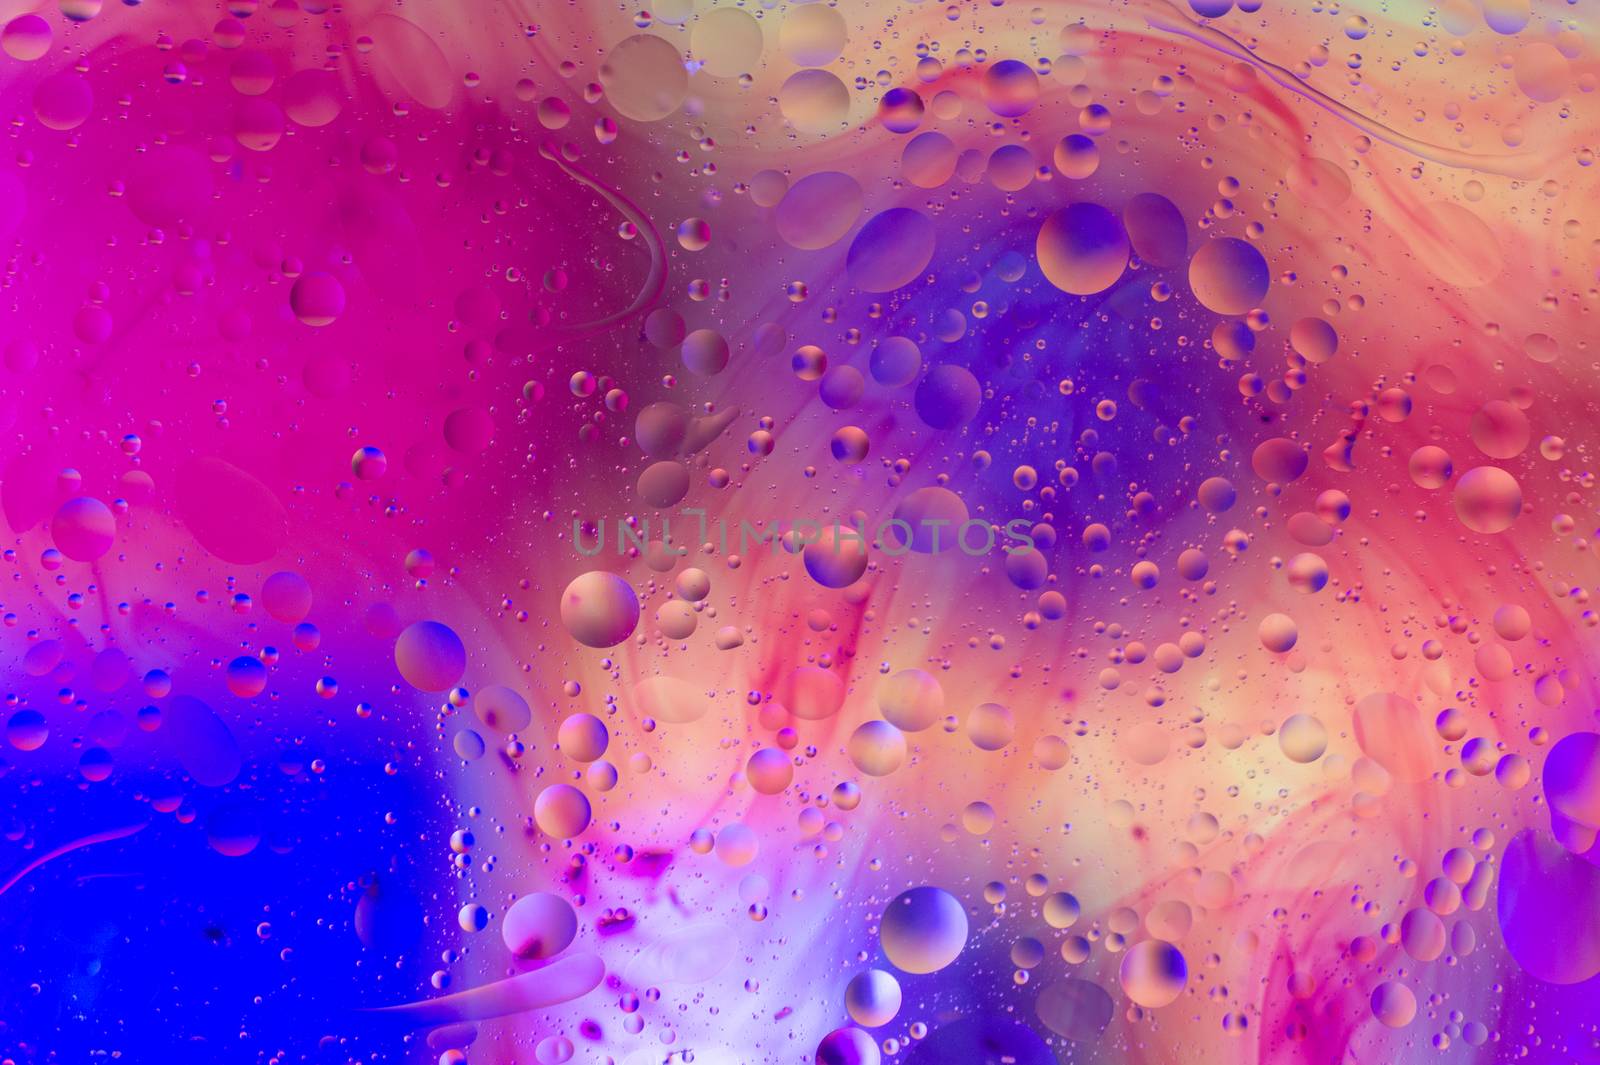 The purple abstract composition with oil drops in water.  by alexsdriver